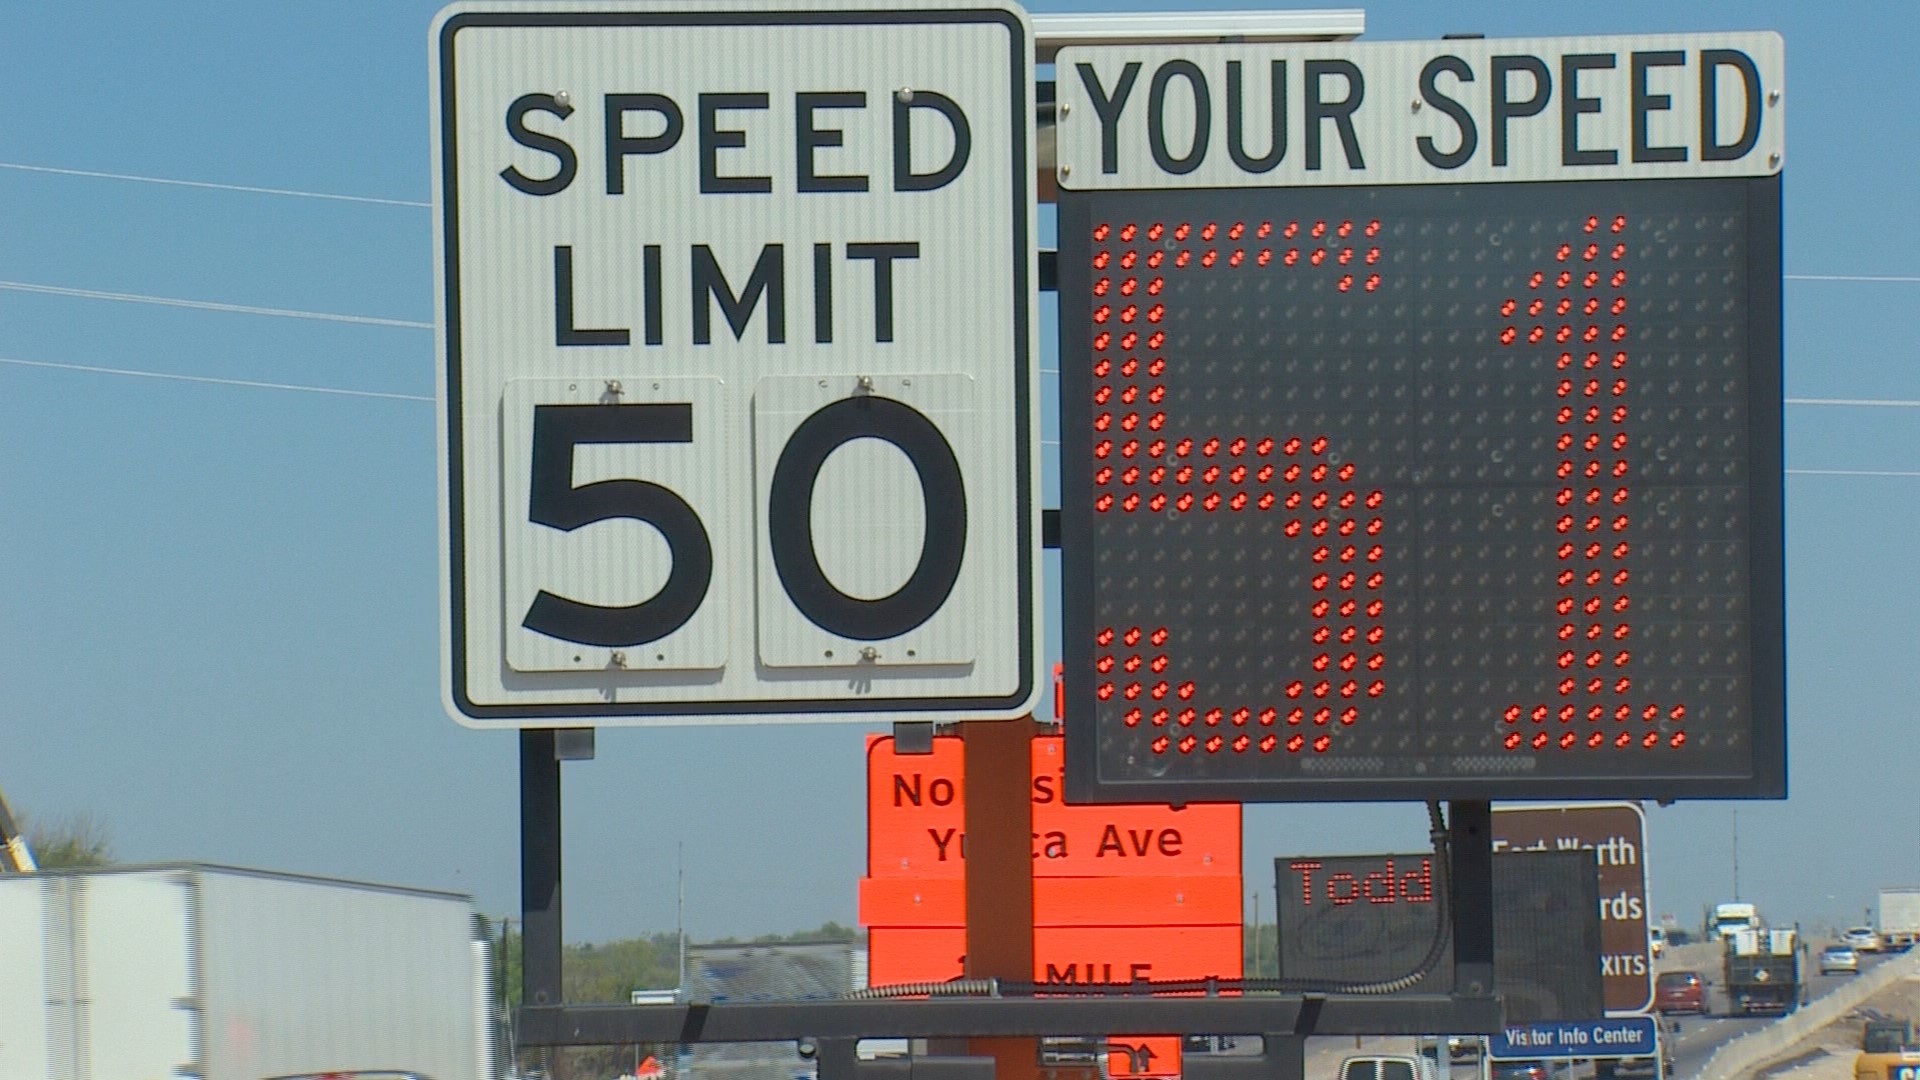 Fort Worth explores adding 60 more flashing 'Your Speed' signs - WFAA.com